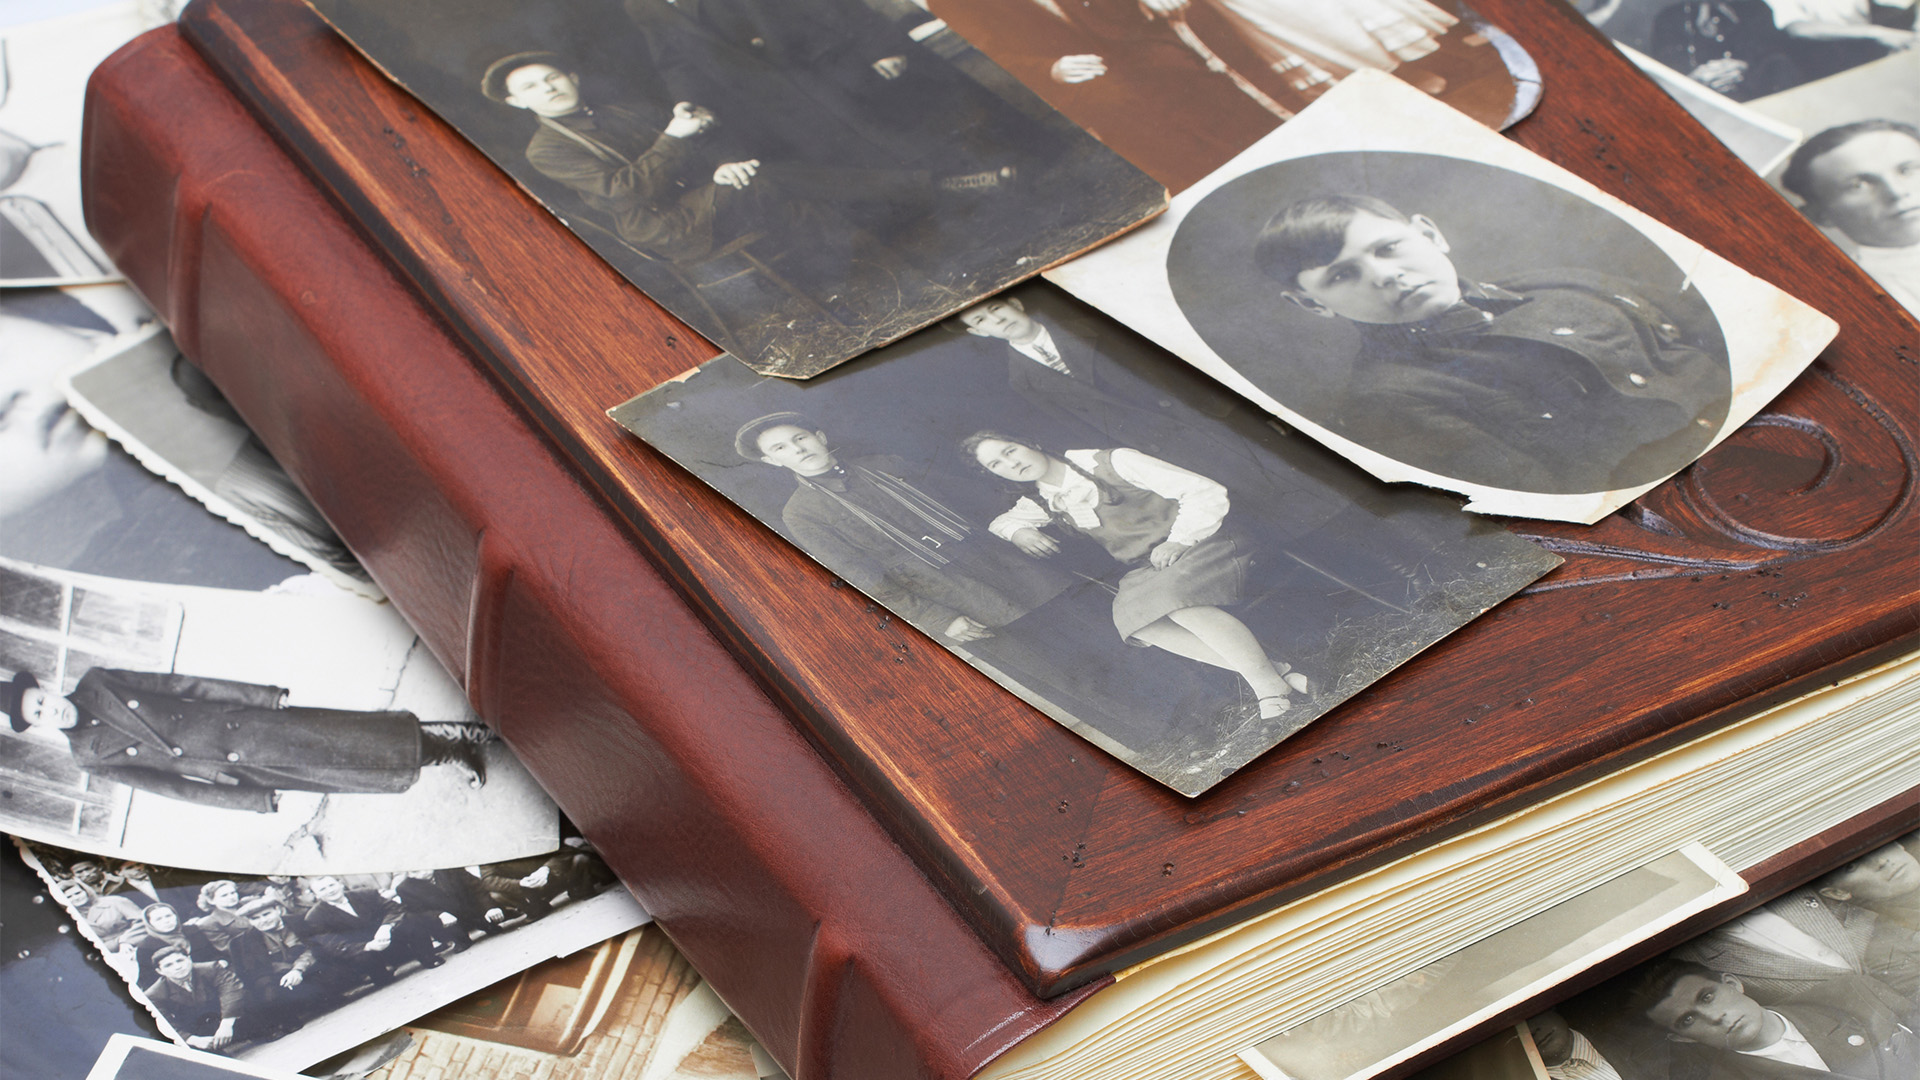 HeritageQuest:  Research Your Family History